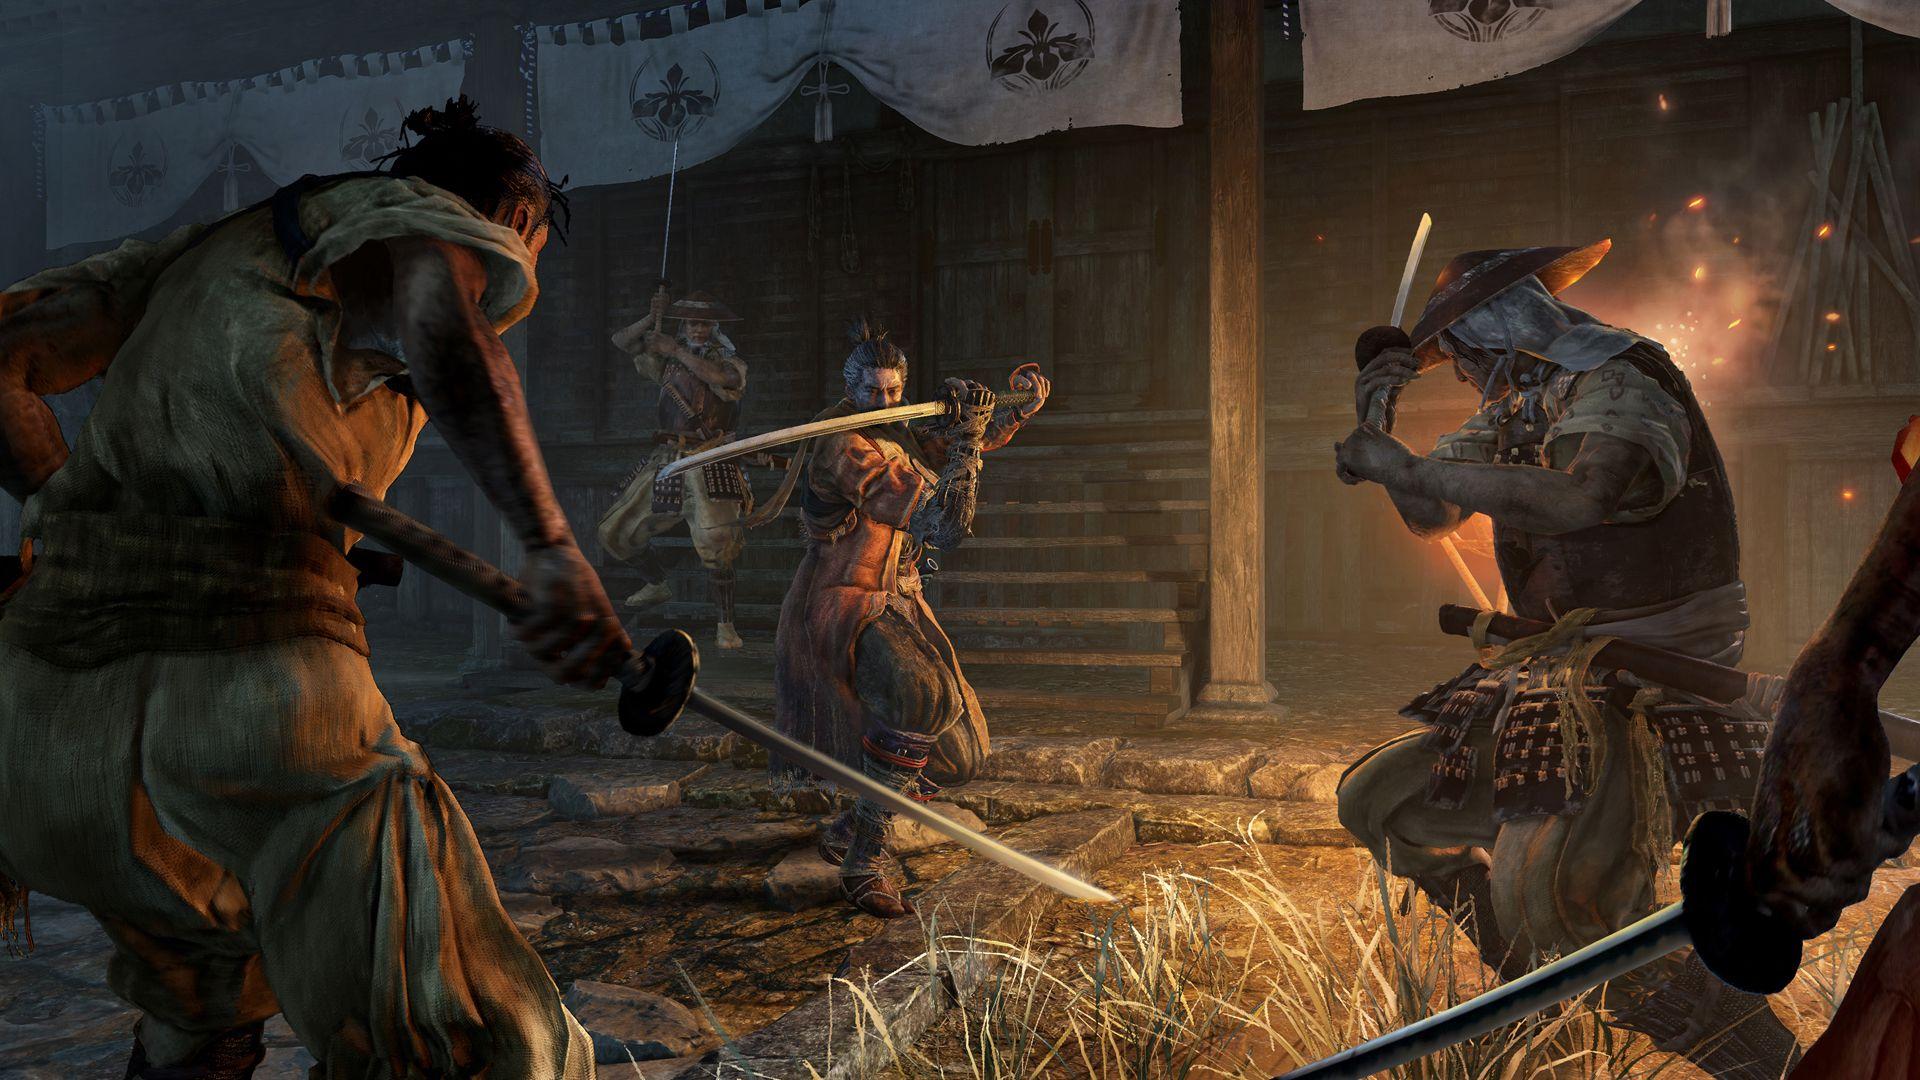 Sekiro: Shadows Die Twice Features More Dynamic Boss Fights, Voiced